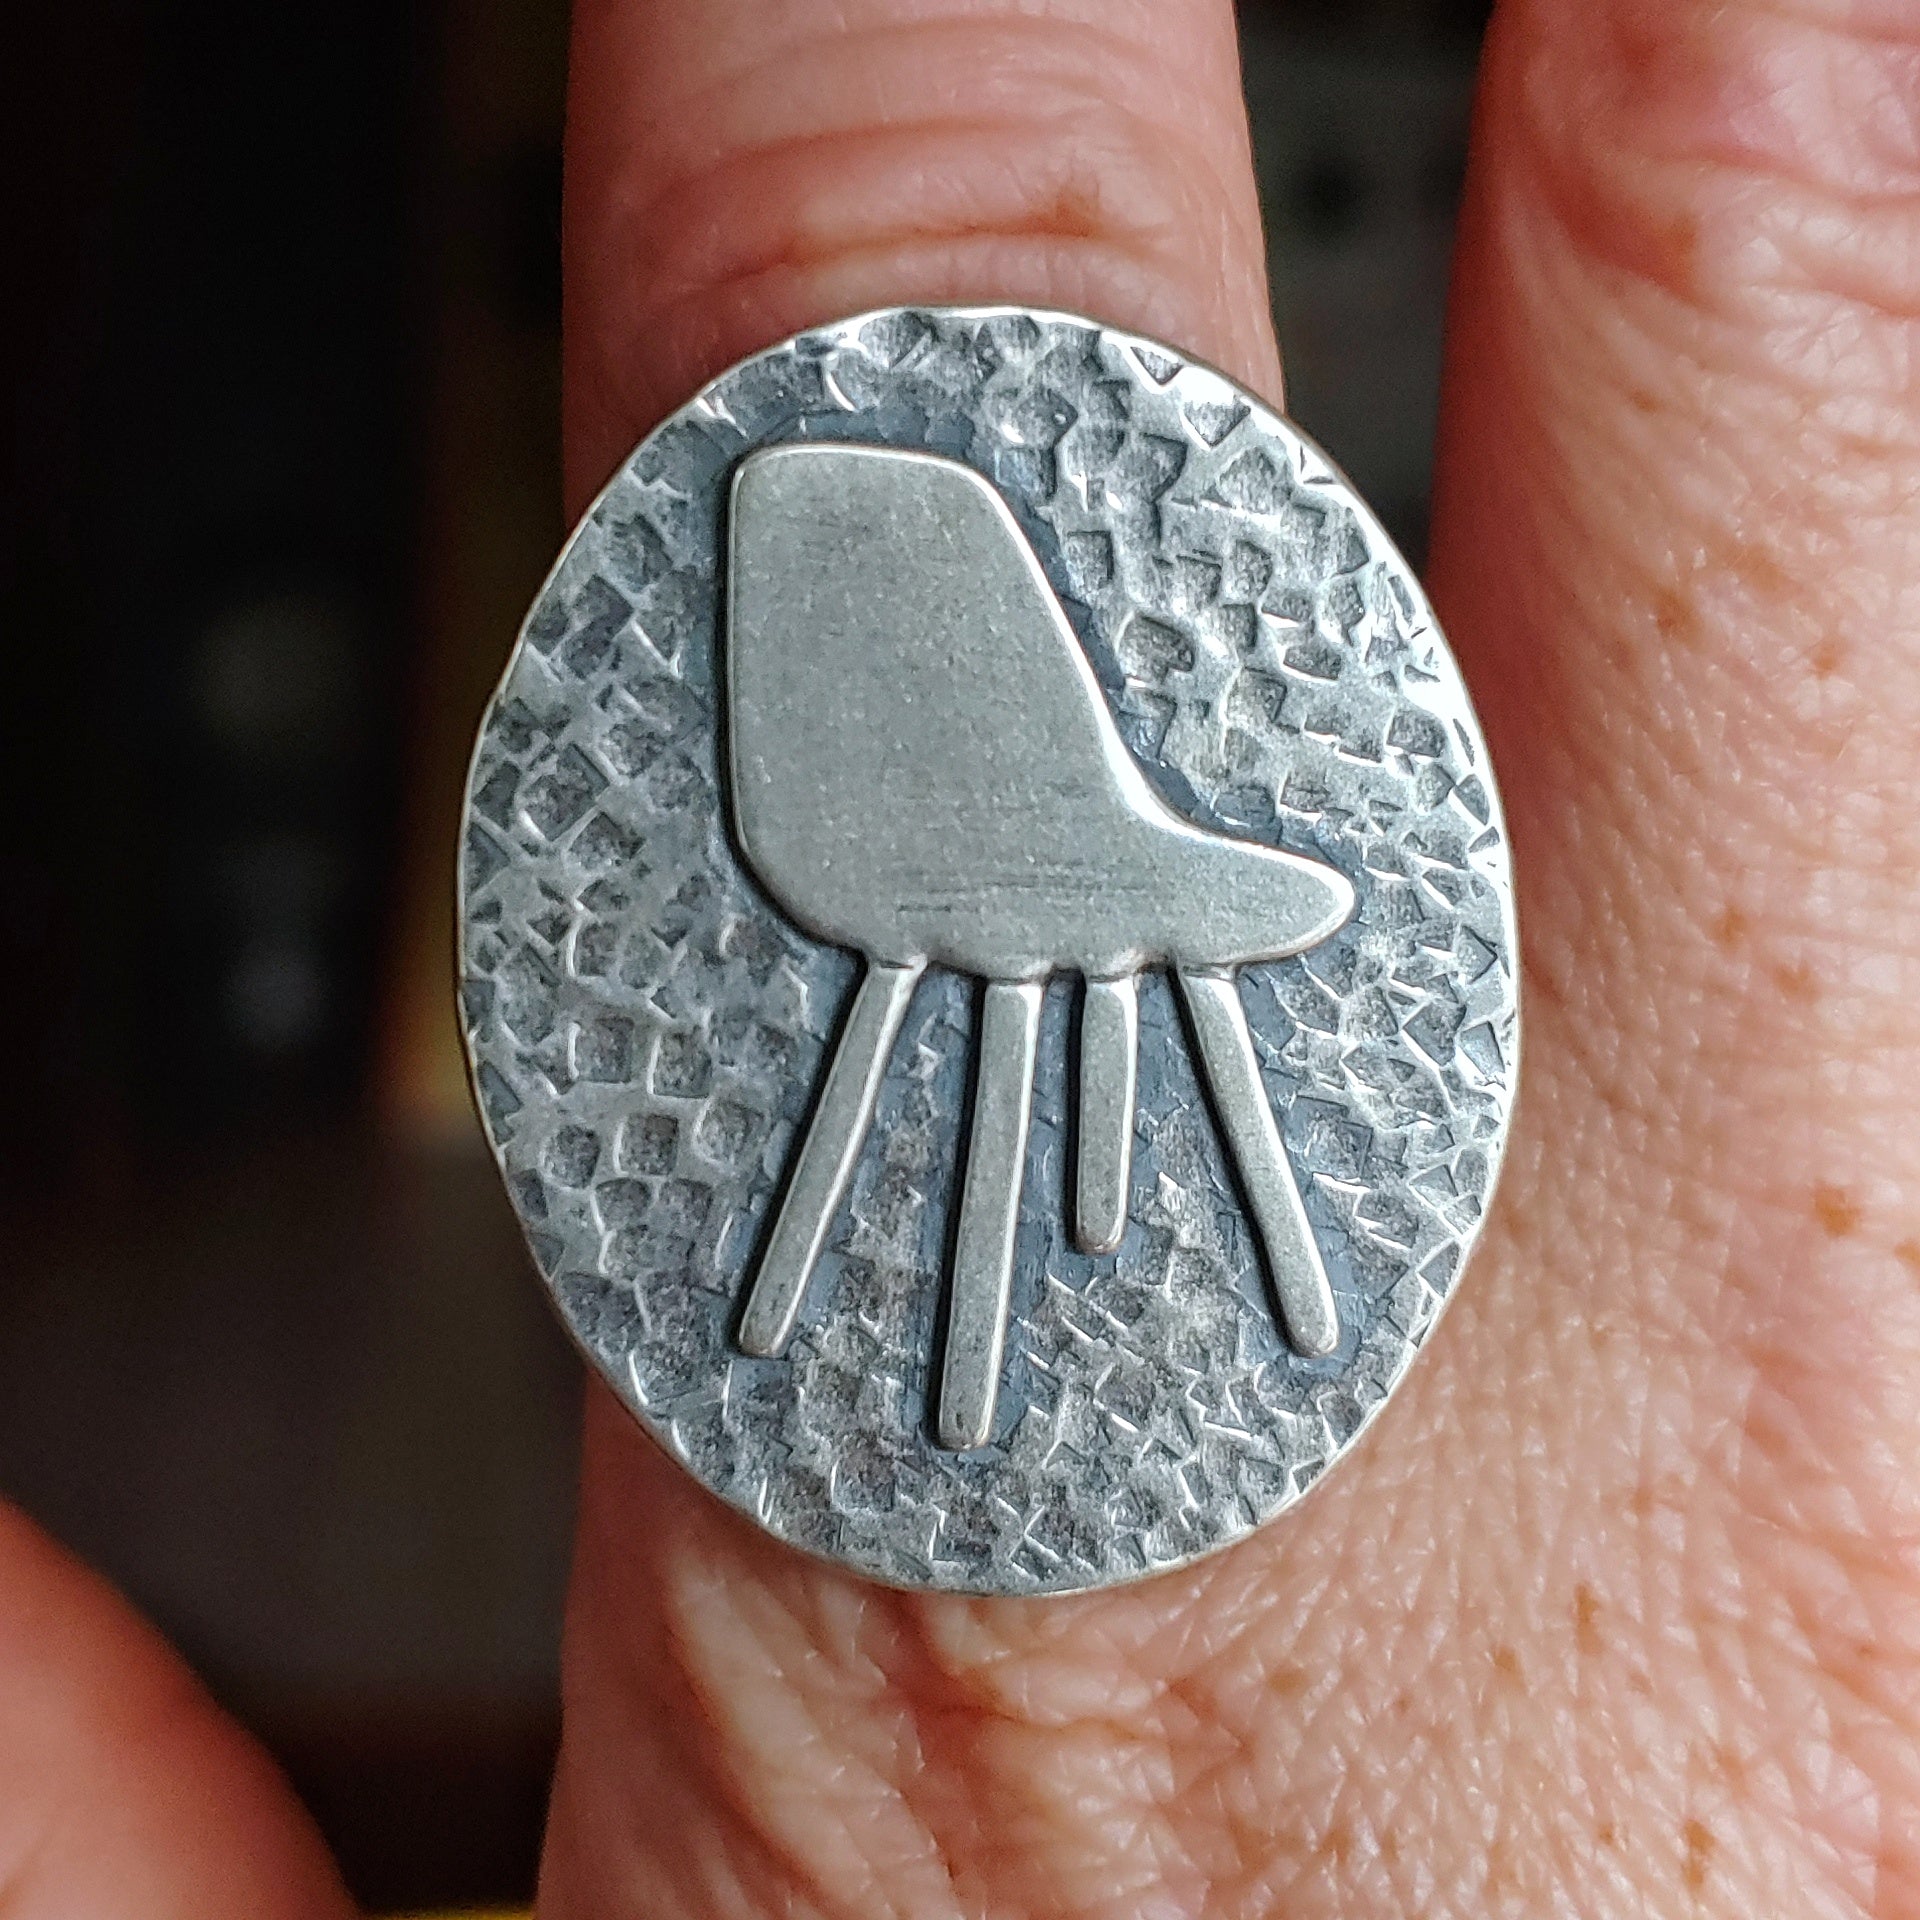 Eames chair ring on finger